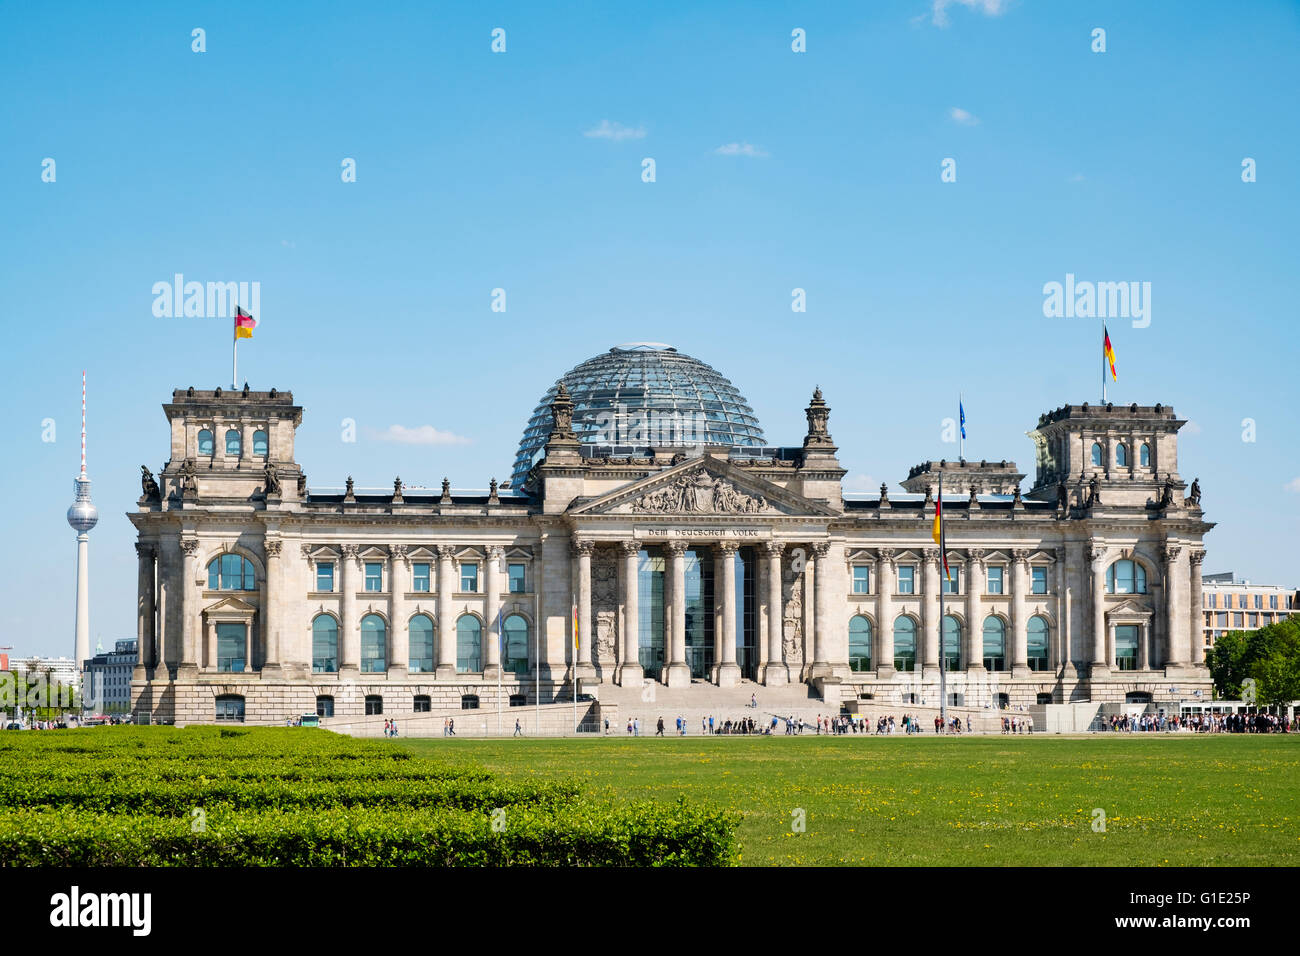 View of the Reichstag Parliament building in Berlin Germany Stock Photo